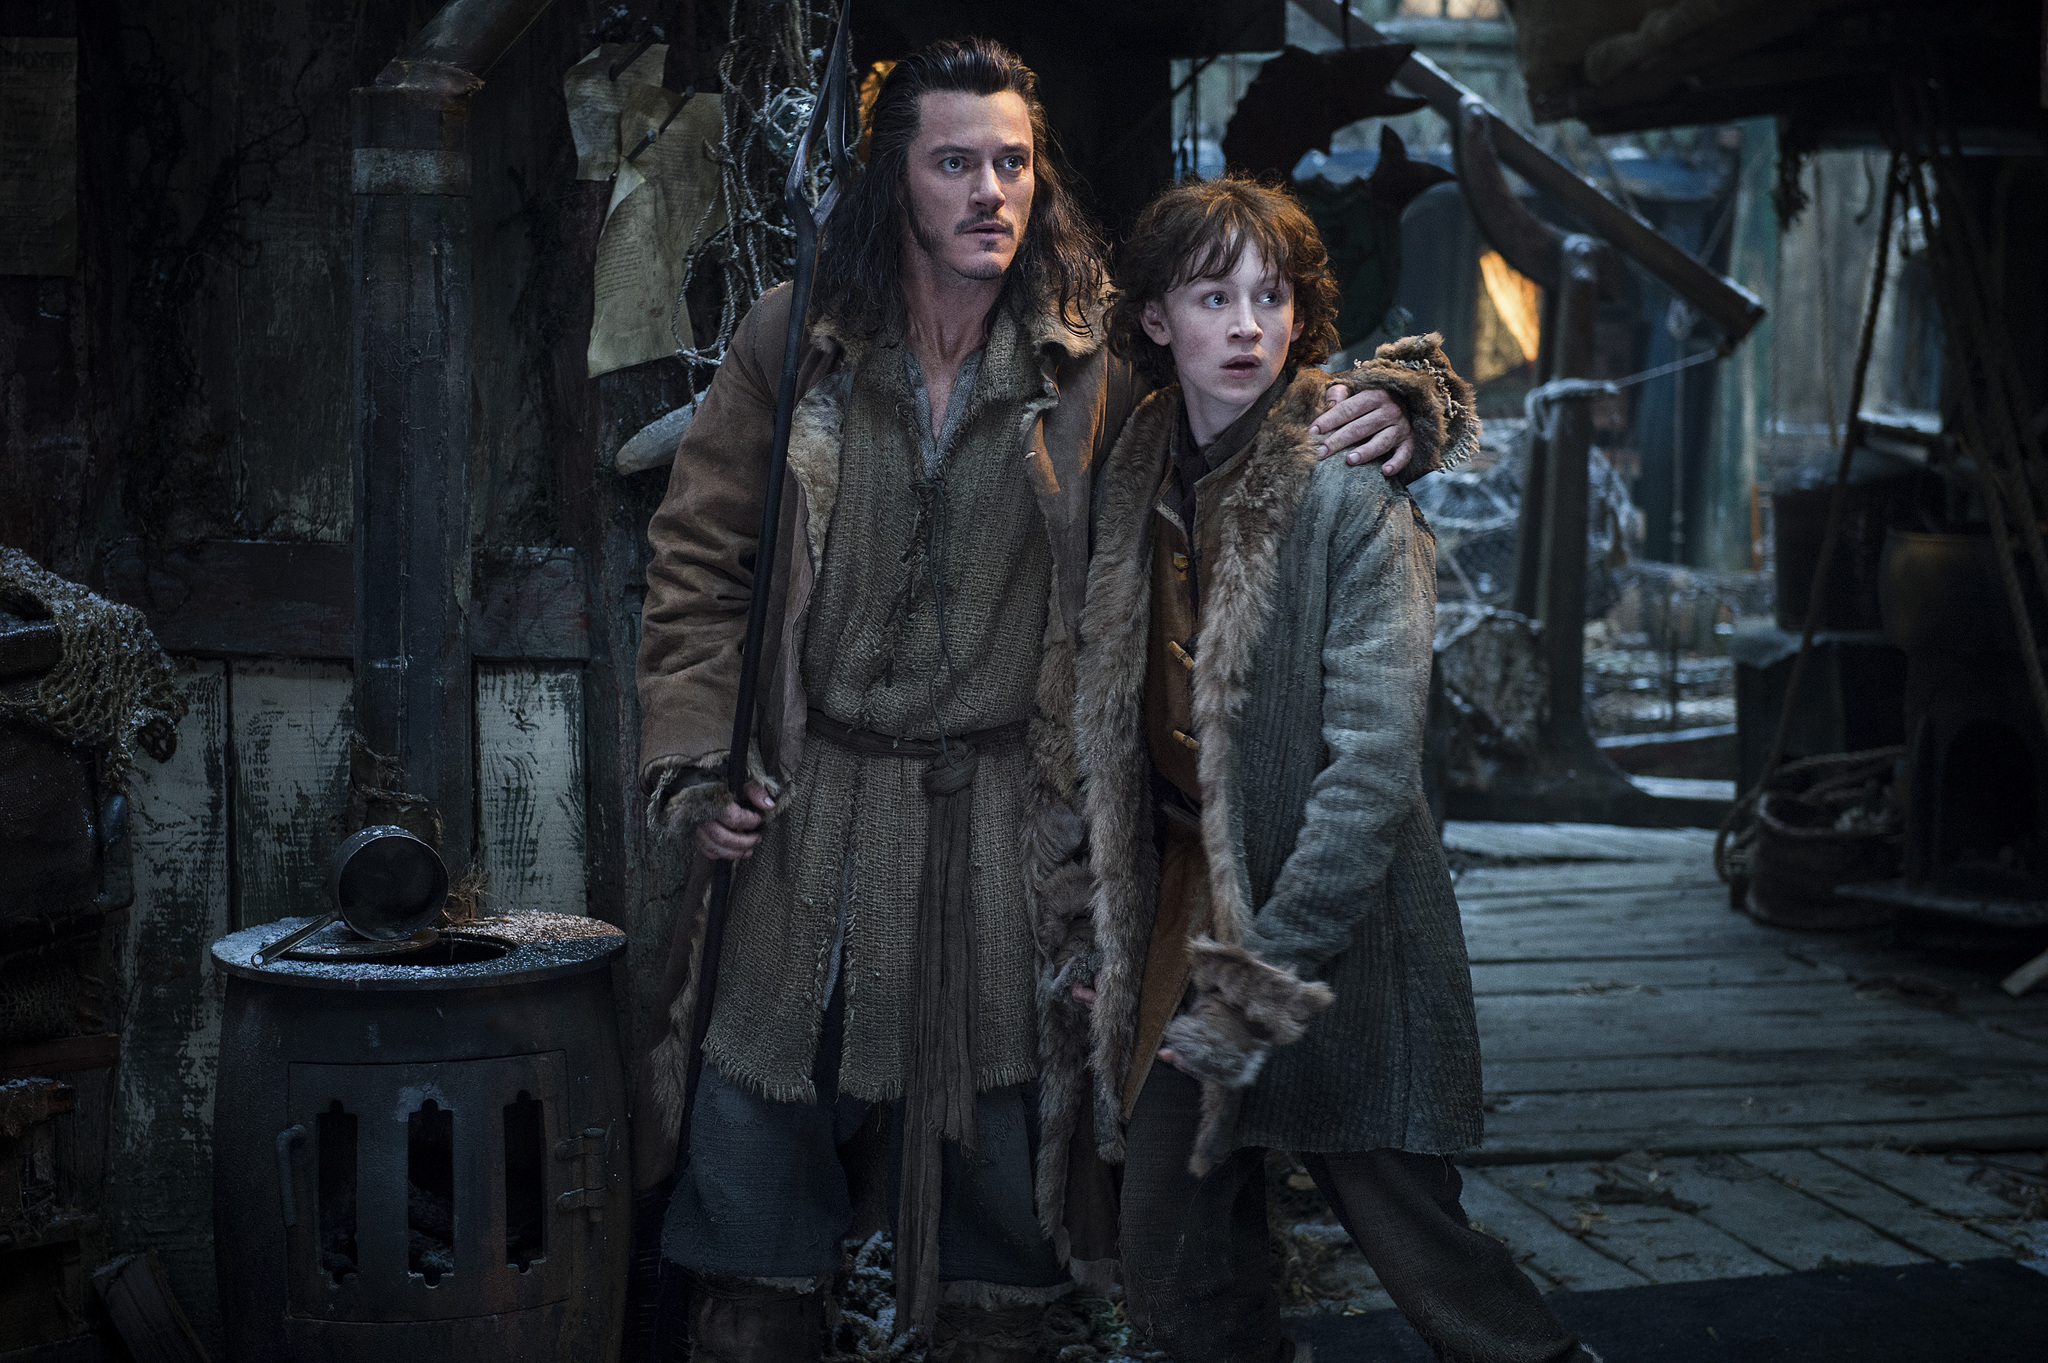 Luke Evans and John Bell in The Hobbit: The Desolation of Smaug (2013)